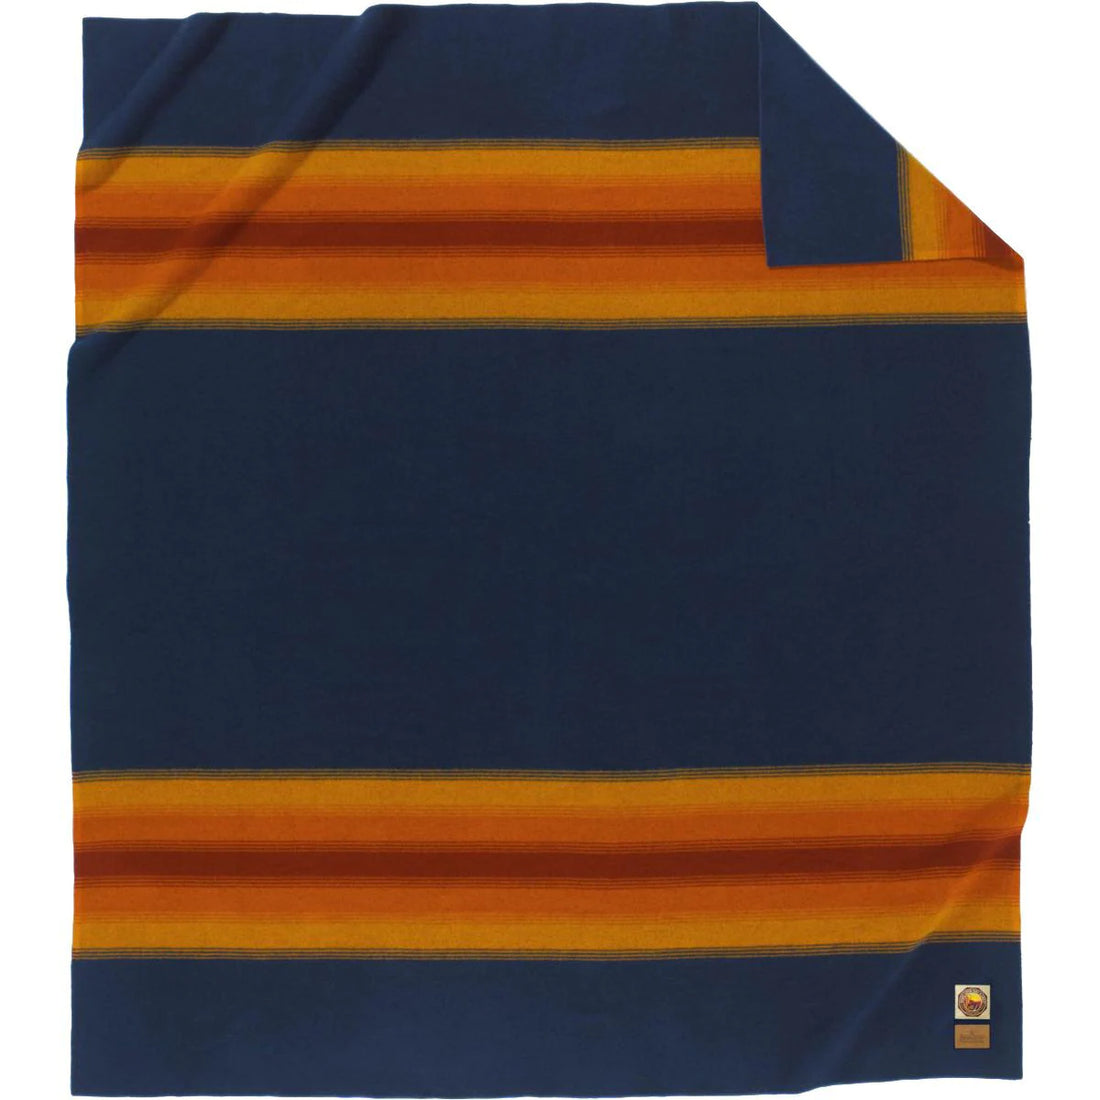 Pendleton Grand Canyon National Park Blanket in Navy view of blanket